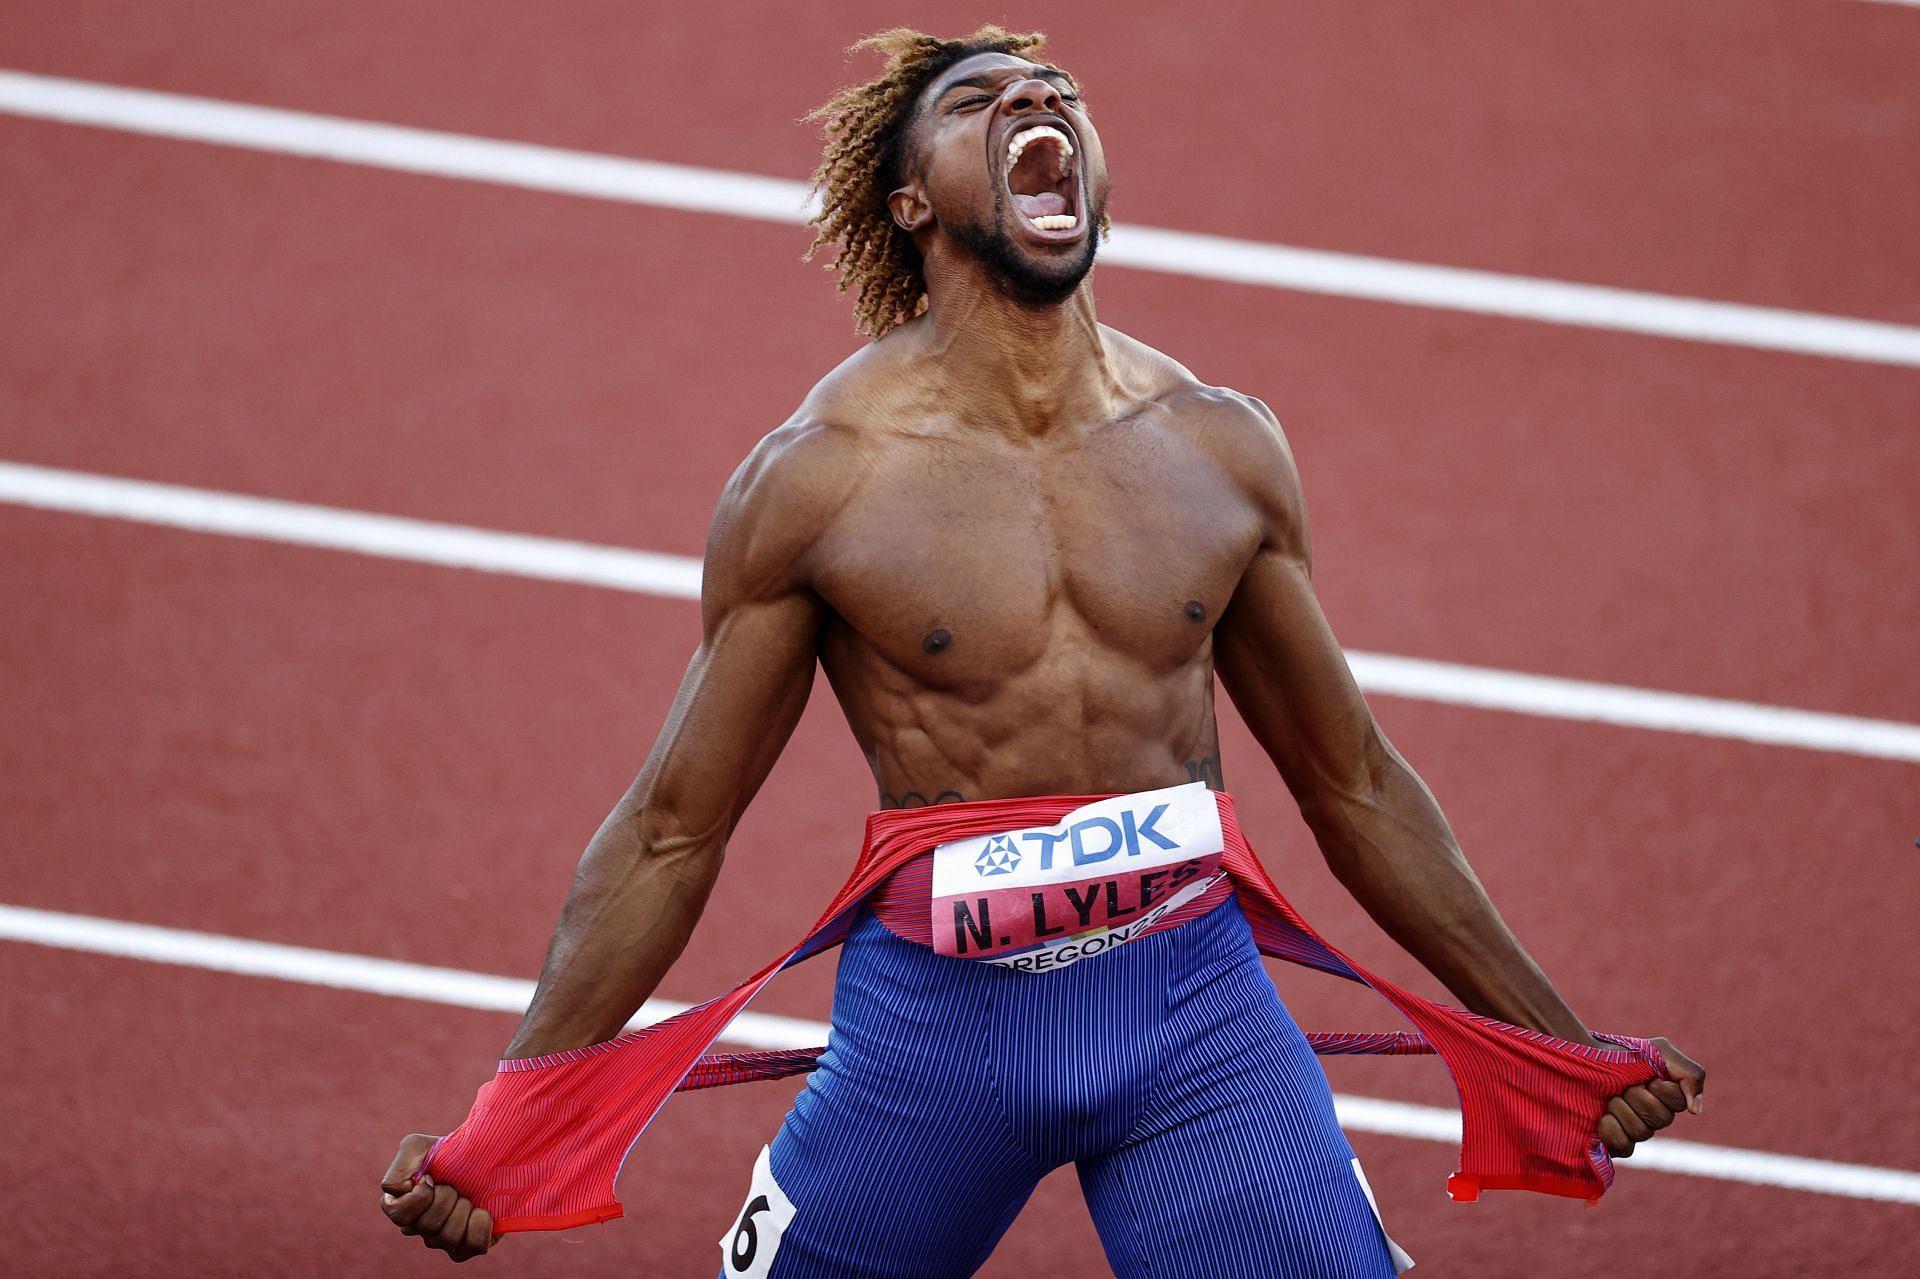 Noah Lyles celebrates winning gold in the Men&#039;s 200m Final on day seven of the World Athletics Championships in Eugene, Oregon. (Photo by Steph Chambers/Getty Images)